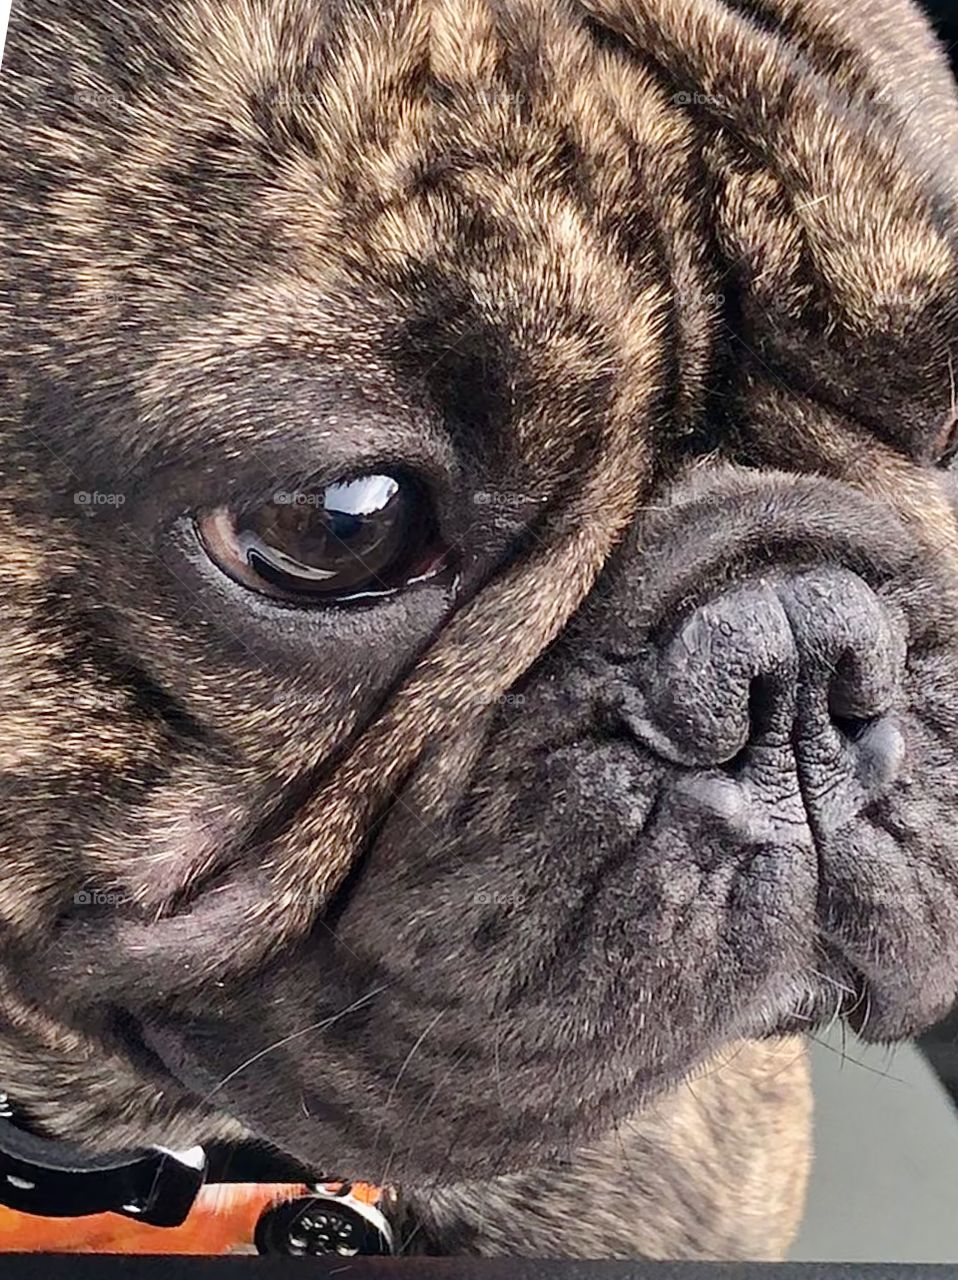 Closeup headshot of a cute brown French Bulldog with its wrinkled face and pushed in nose